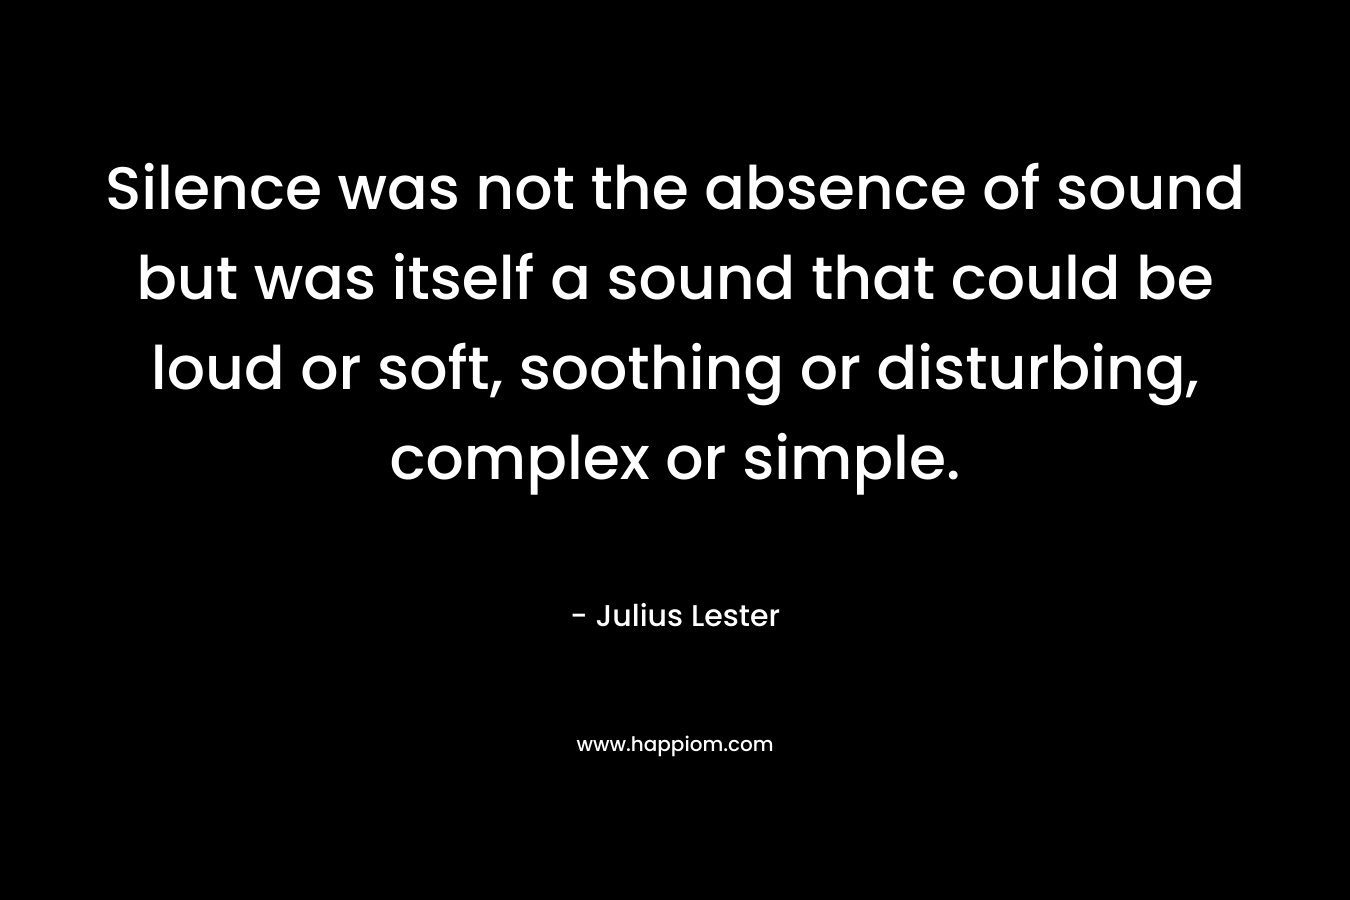 Silence was not the absence of sound but was itself a sound that could be loud or soft, soothing or disturbing, complex or simple. – Julius Lester